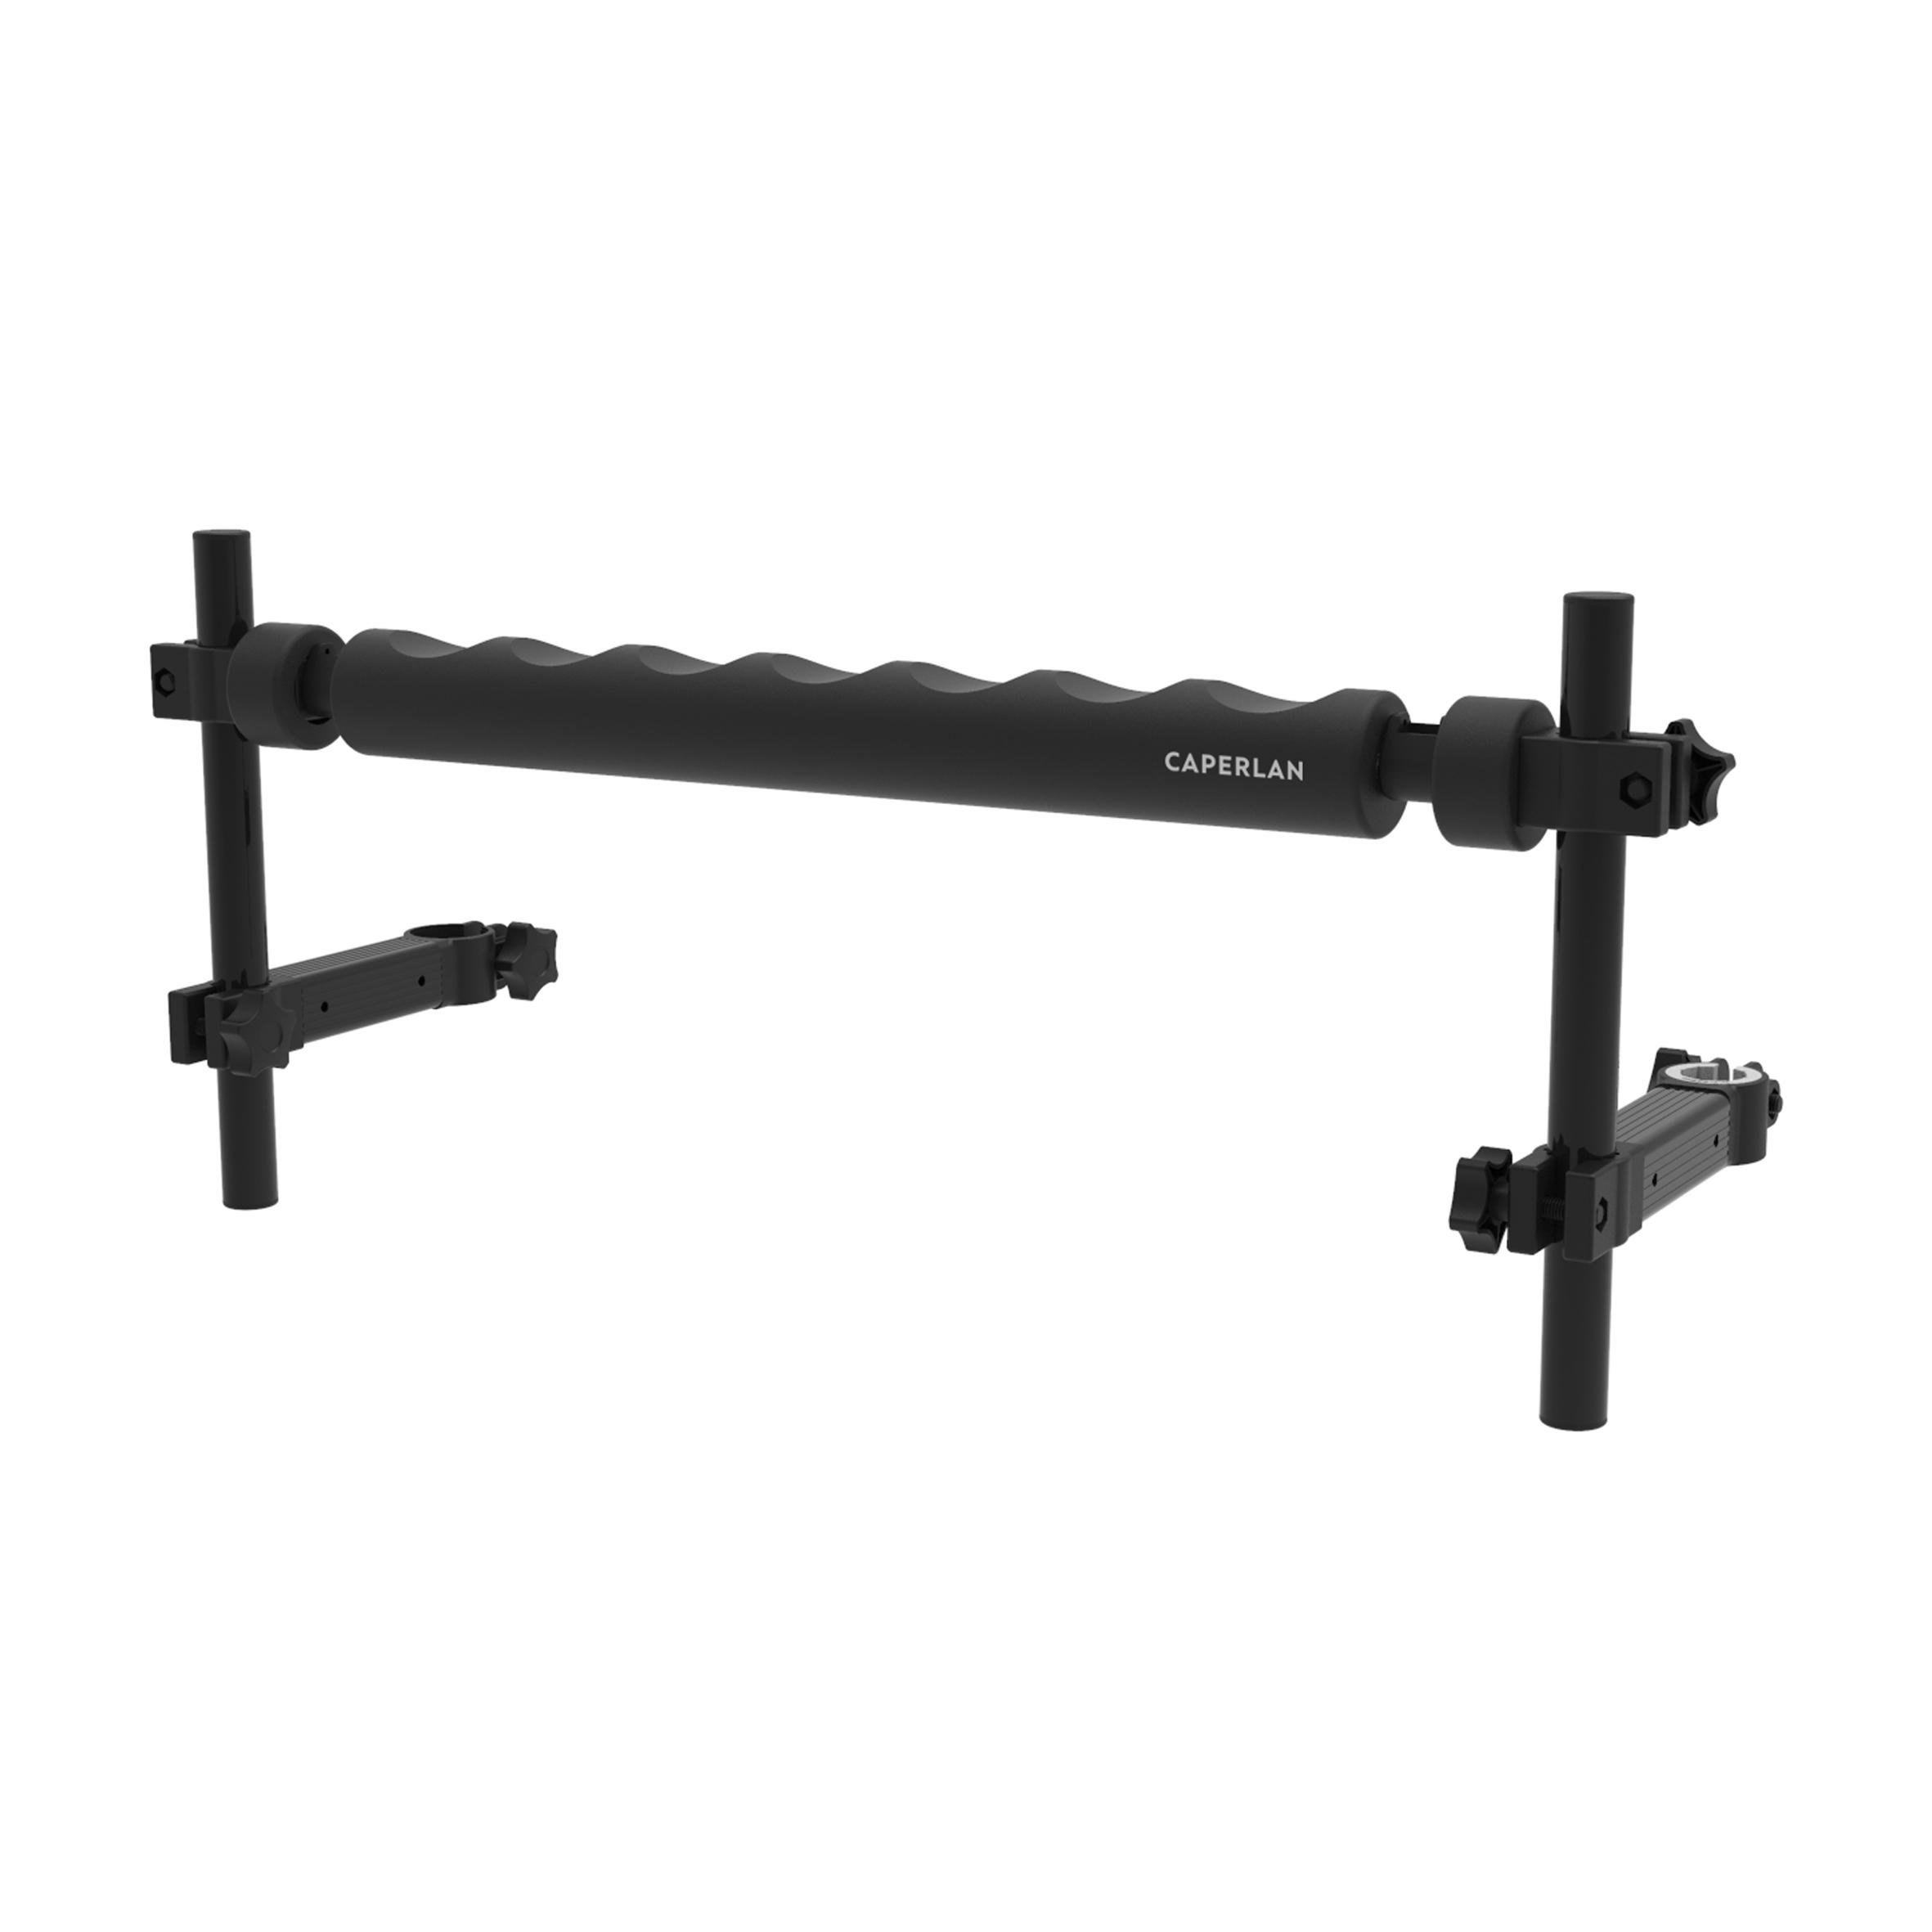 CAPERLAN BAITING BAR FOR CSB FISHING STATION WITH ADJUSTABLE SUPPORT D25 D36